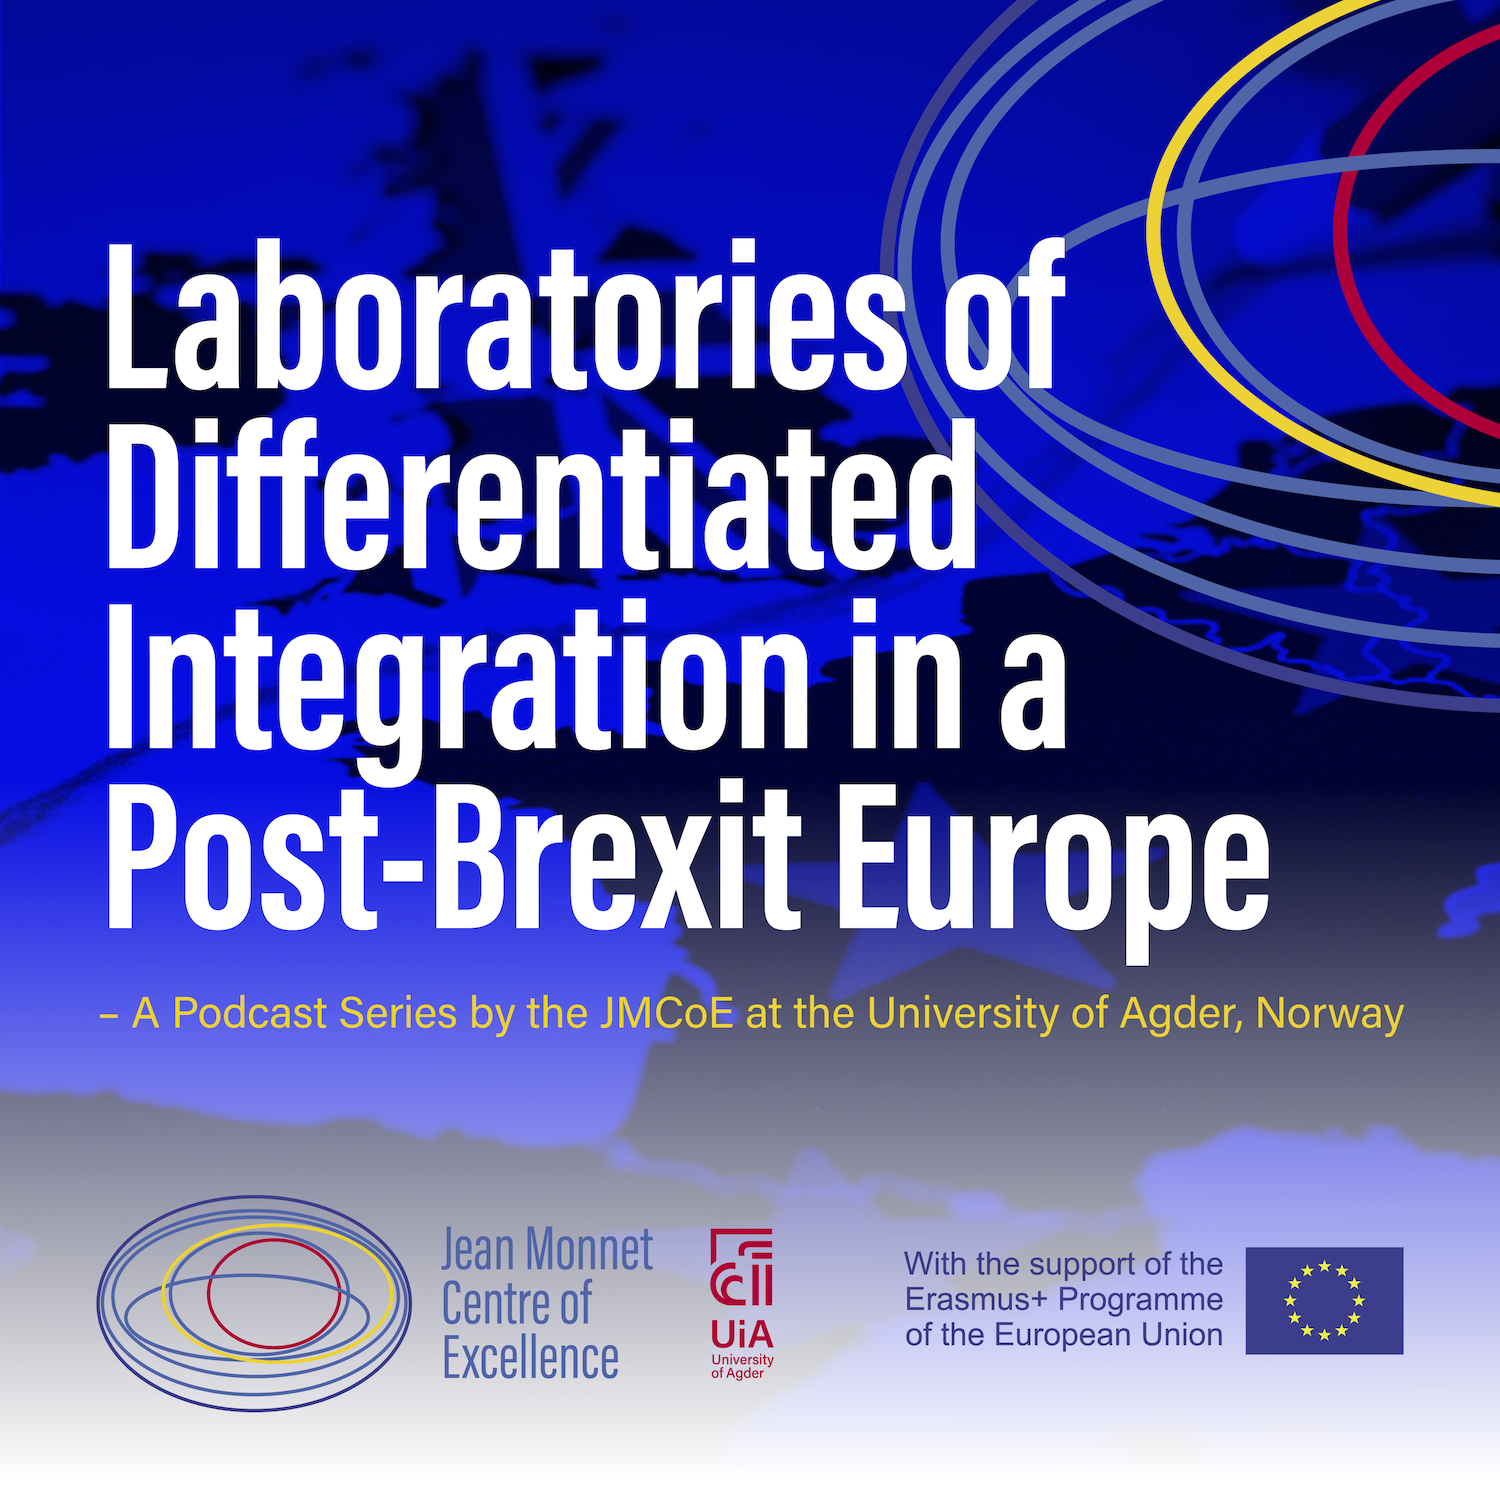 Artwork for podcast Laboratories of Differentiated Integration in a Post-Brexit Europe